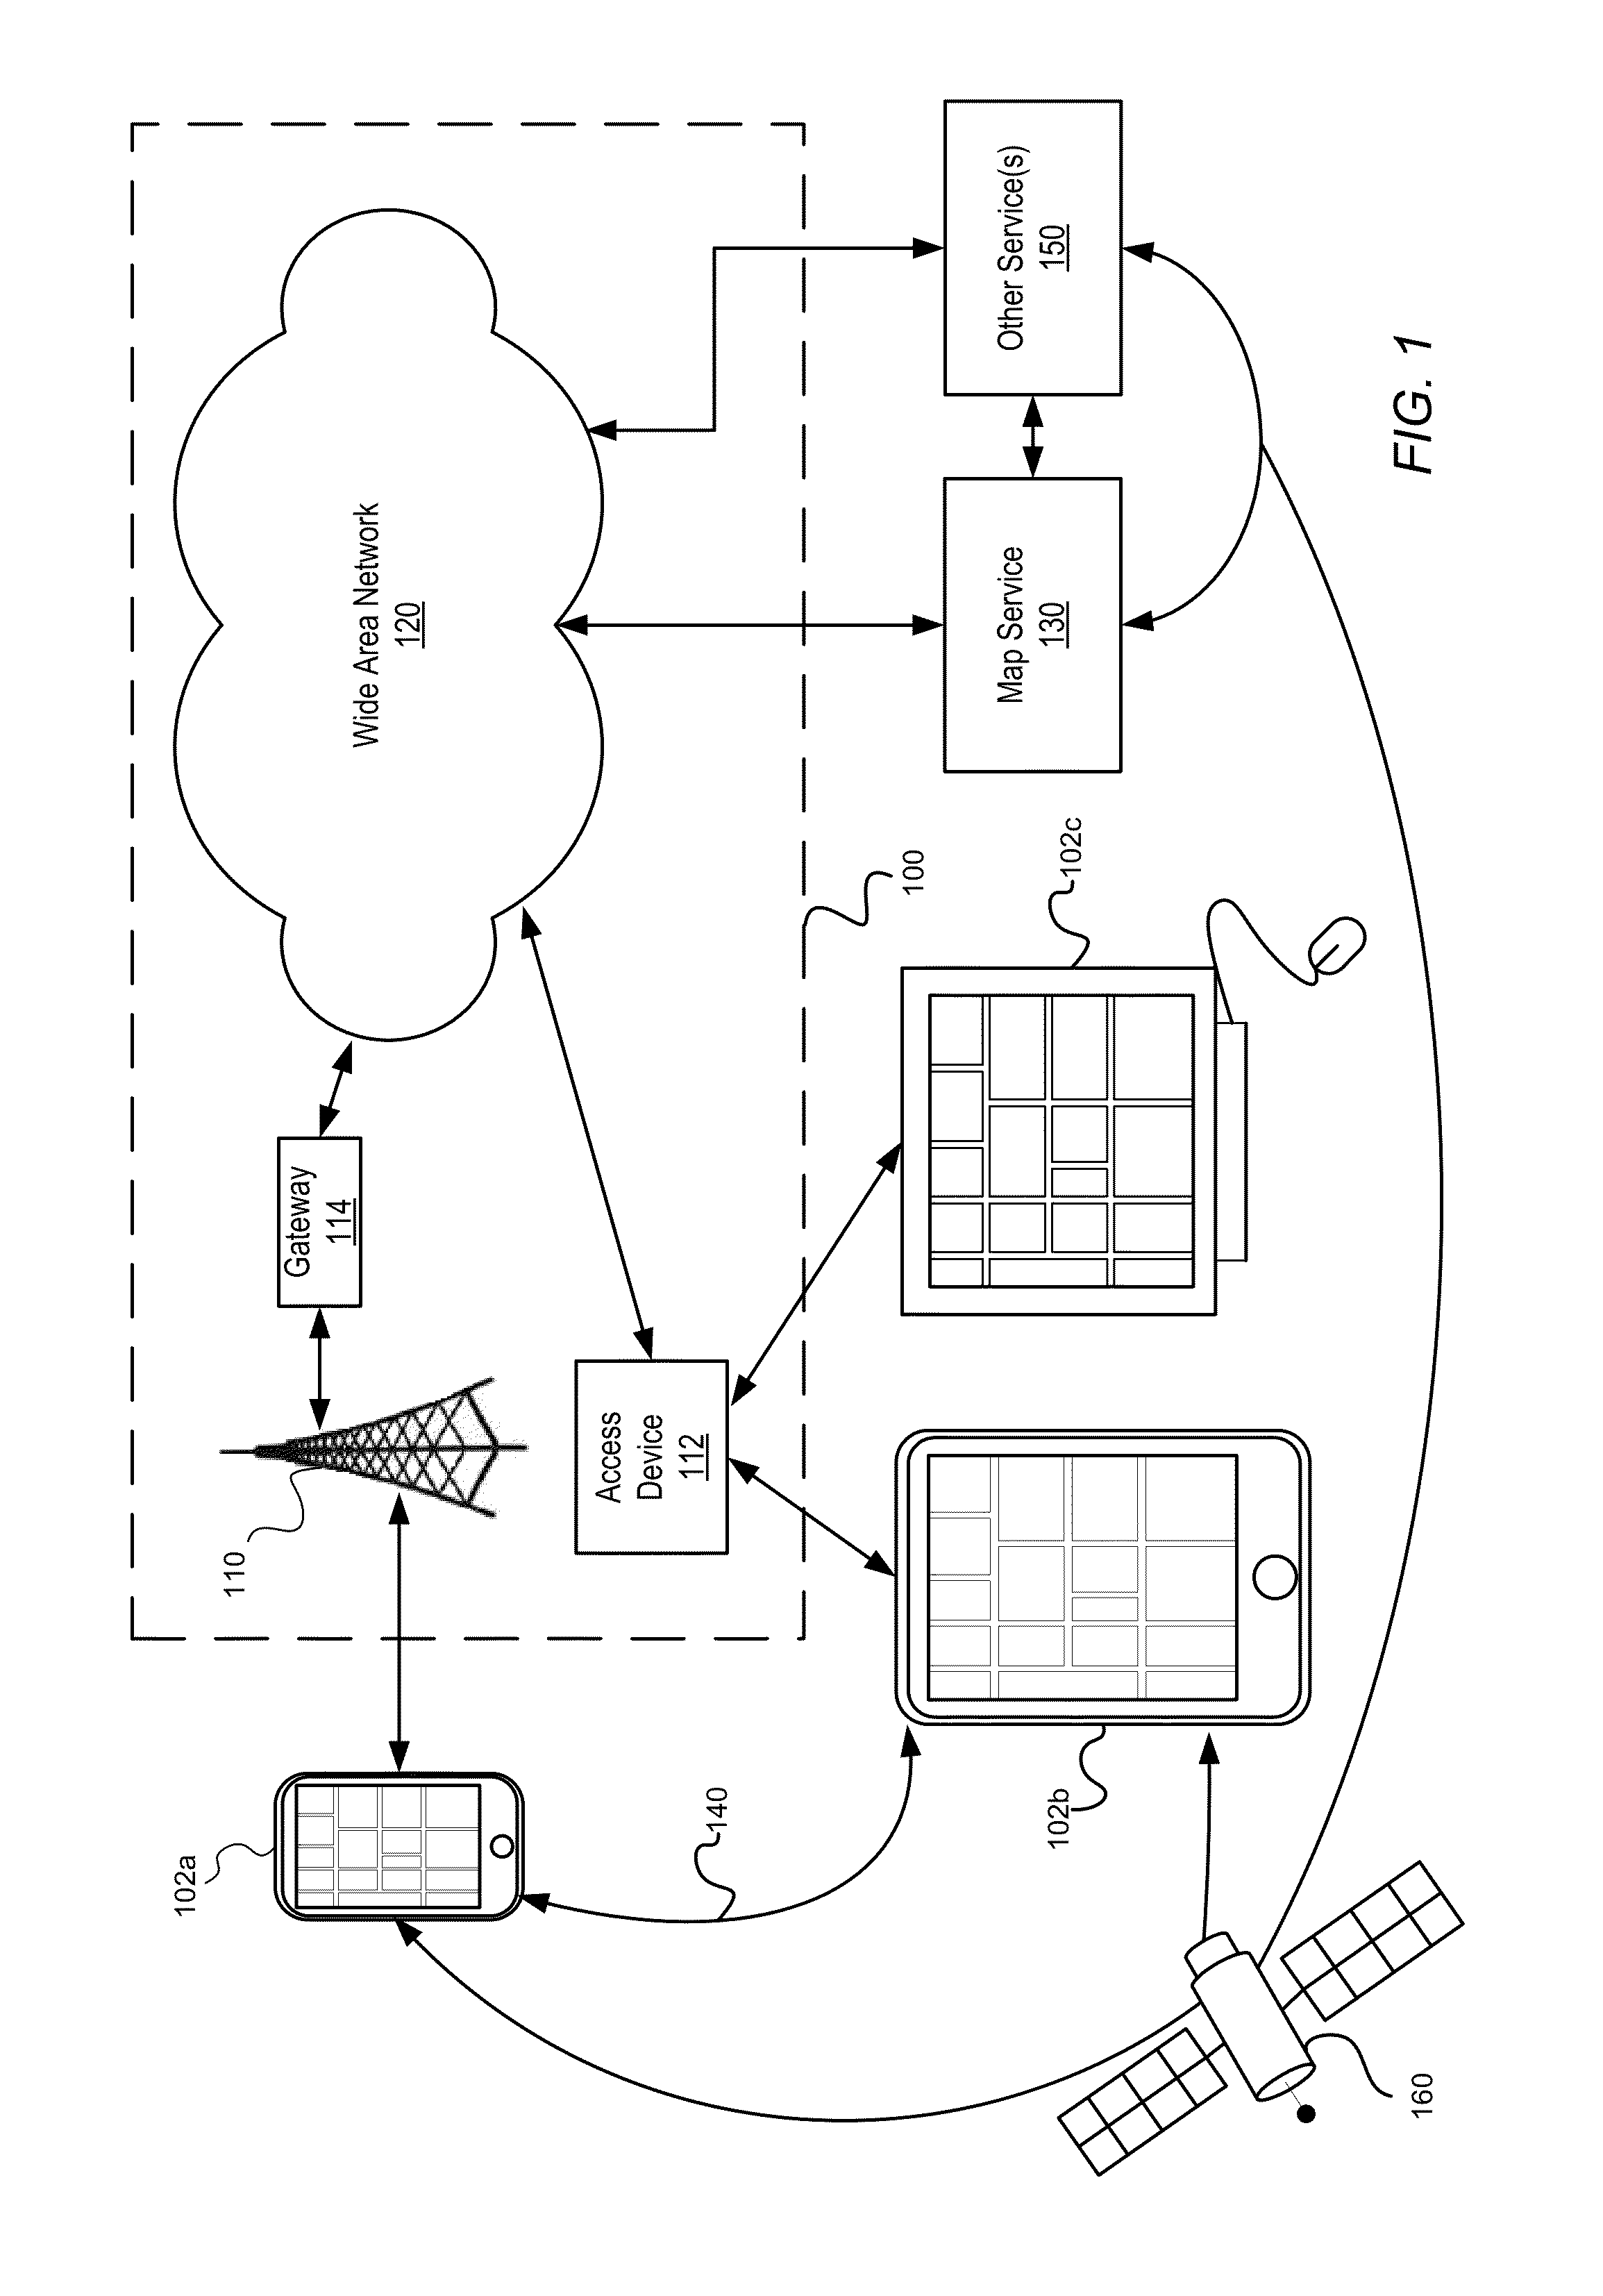 Method, system and apparatus for rendering a map with adaptive textures for map features